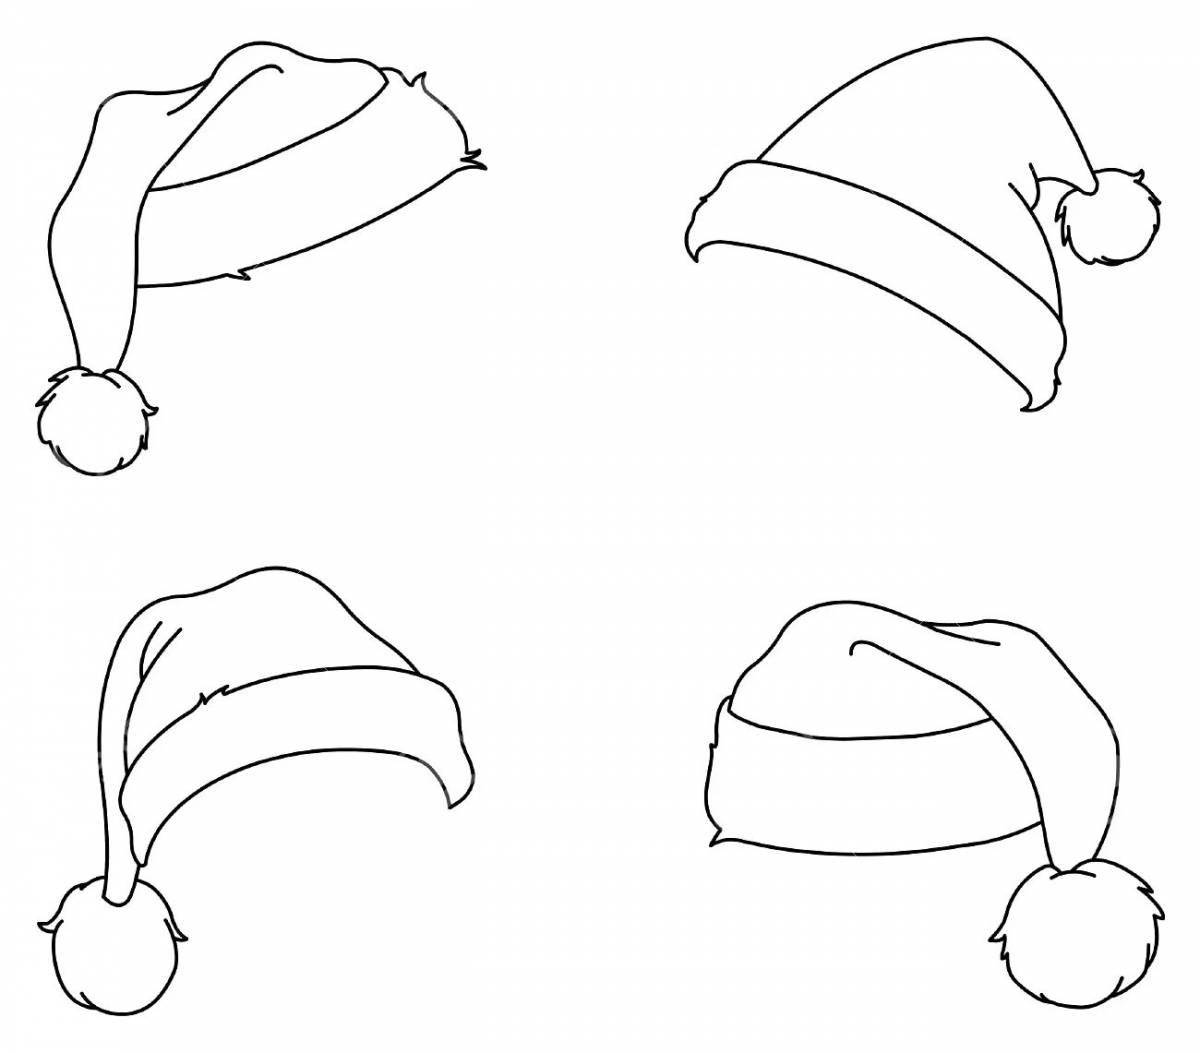 Coloring page adorable santa hat for kids